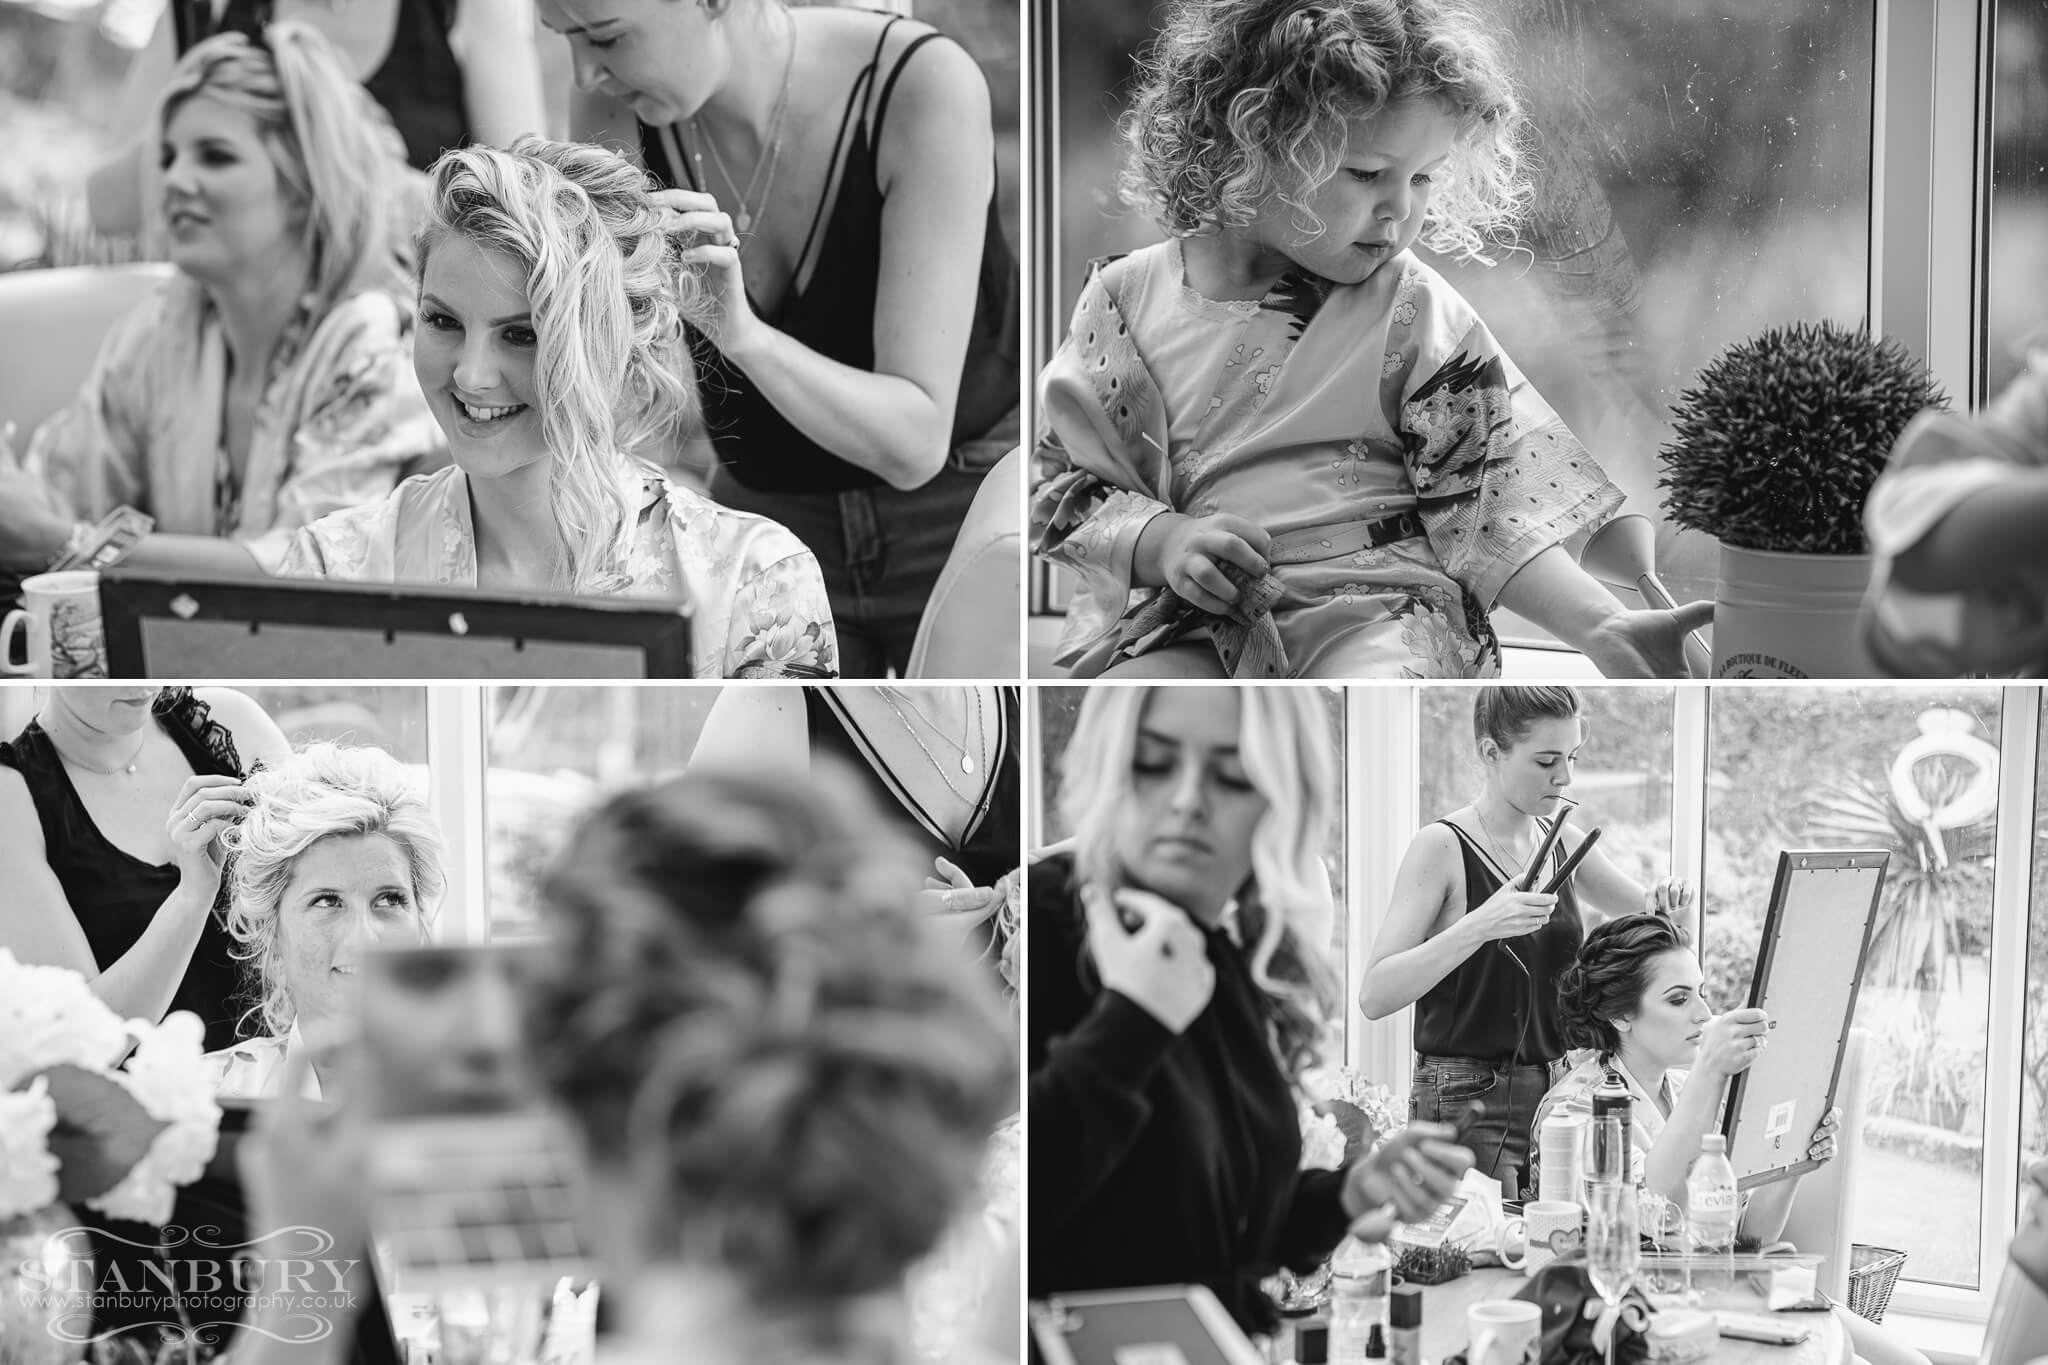 bridesmaids-getting-ready-stanbury-photography